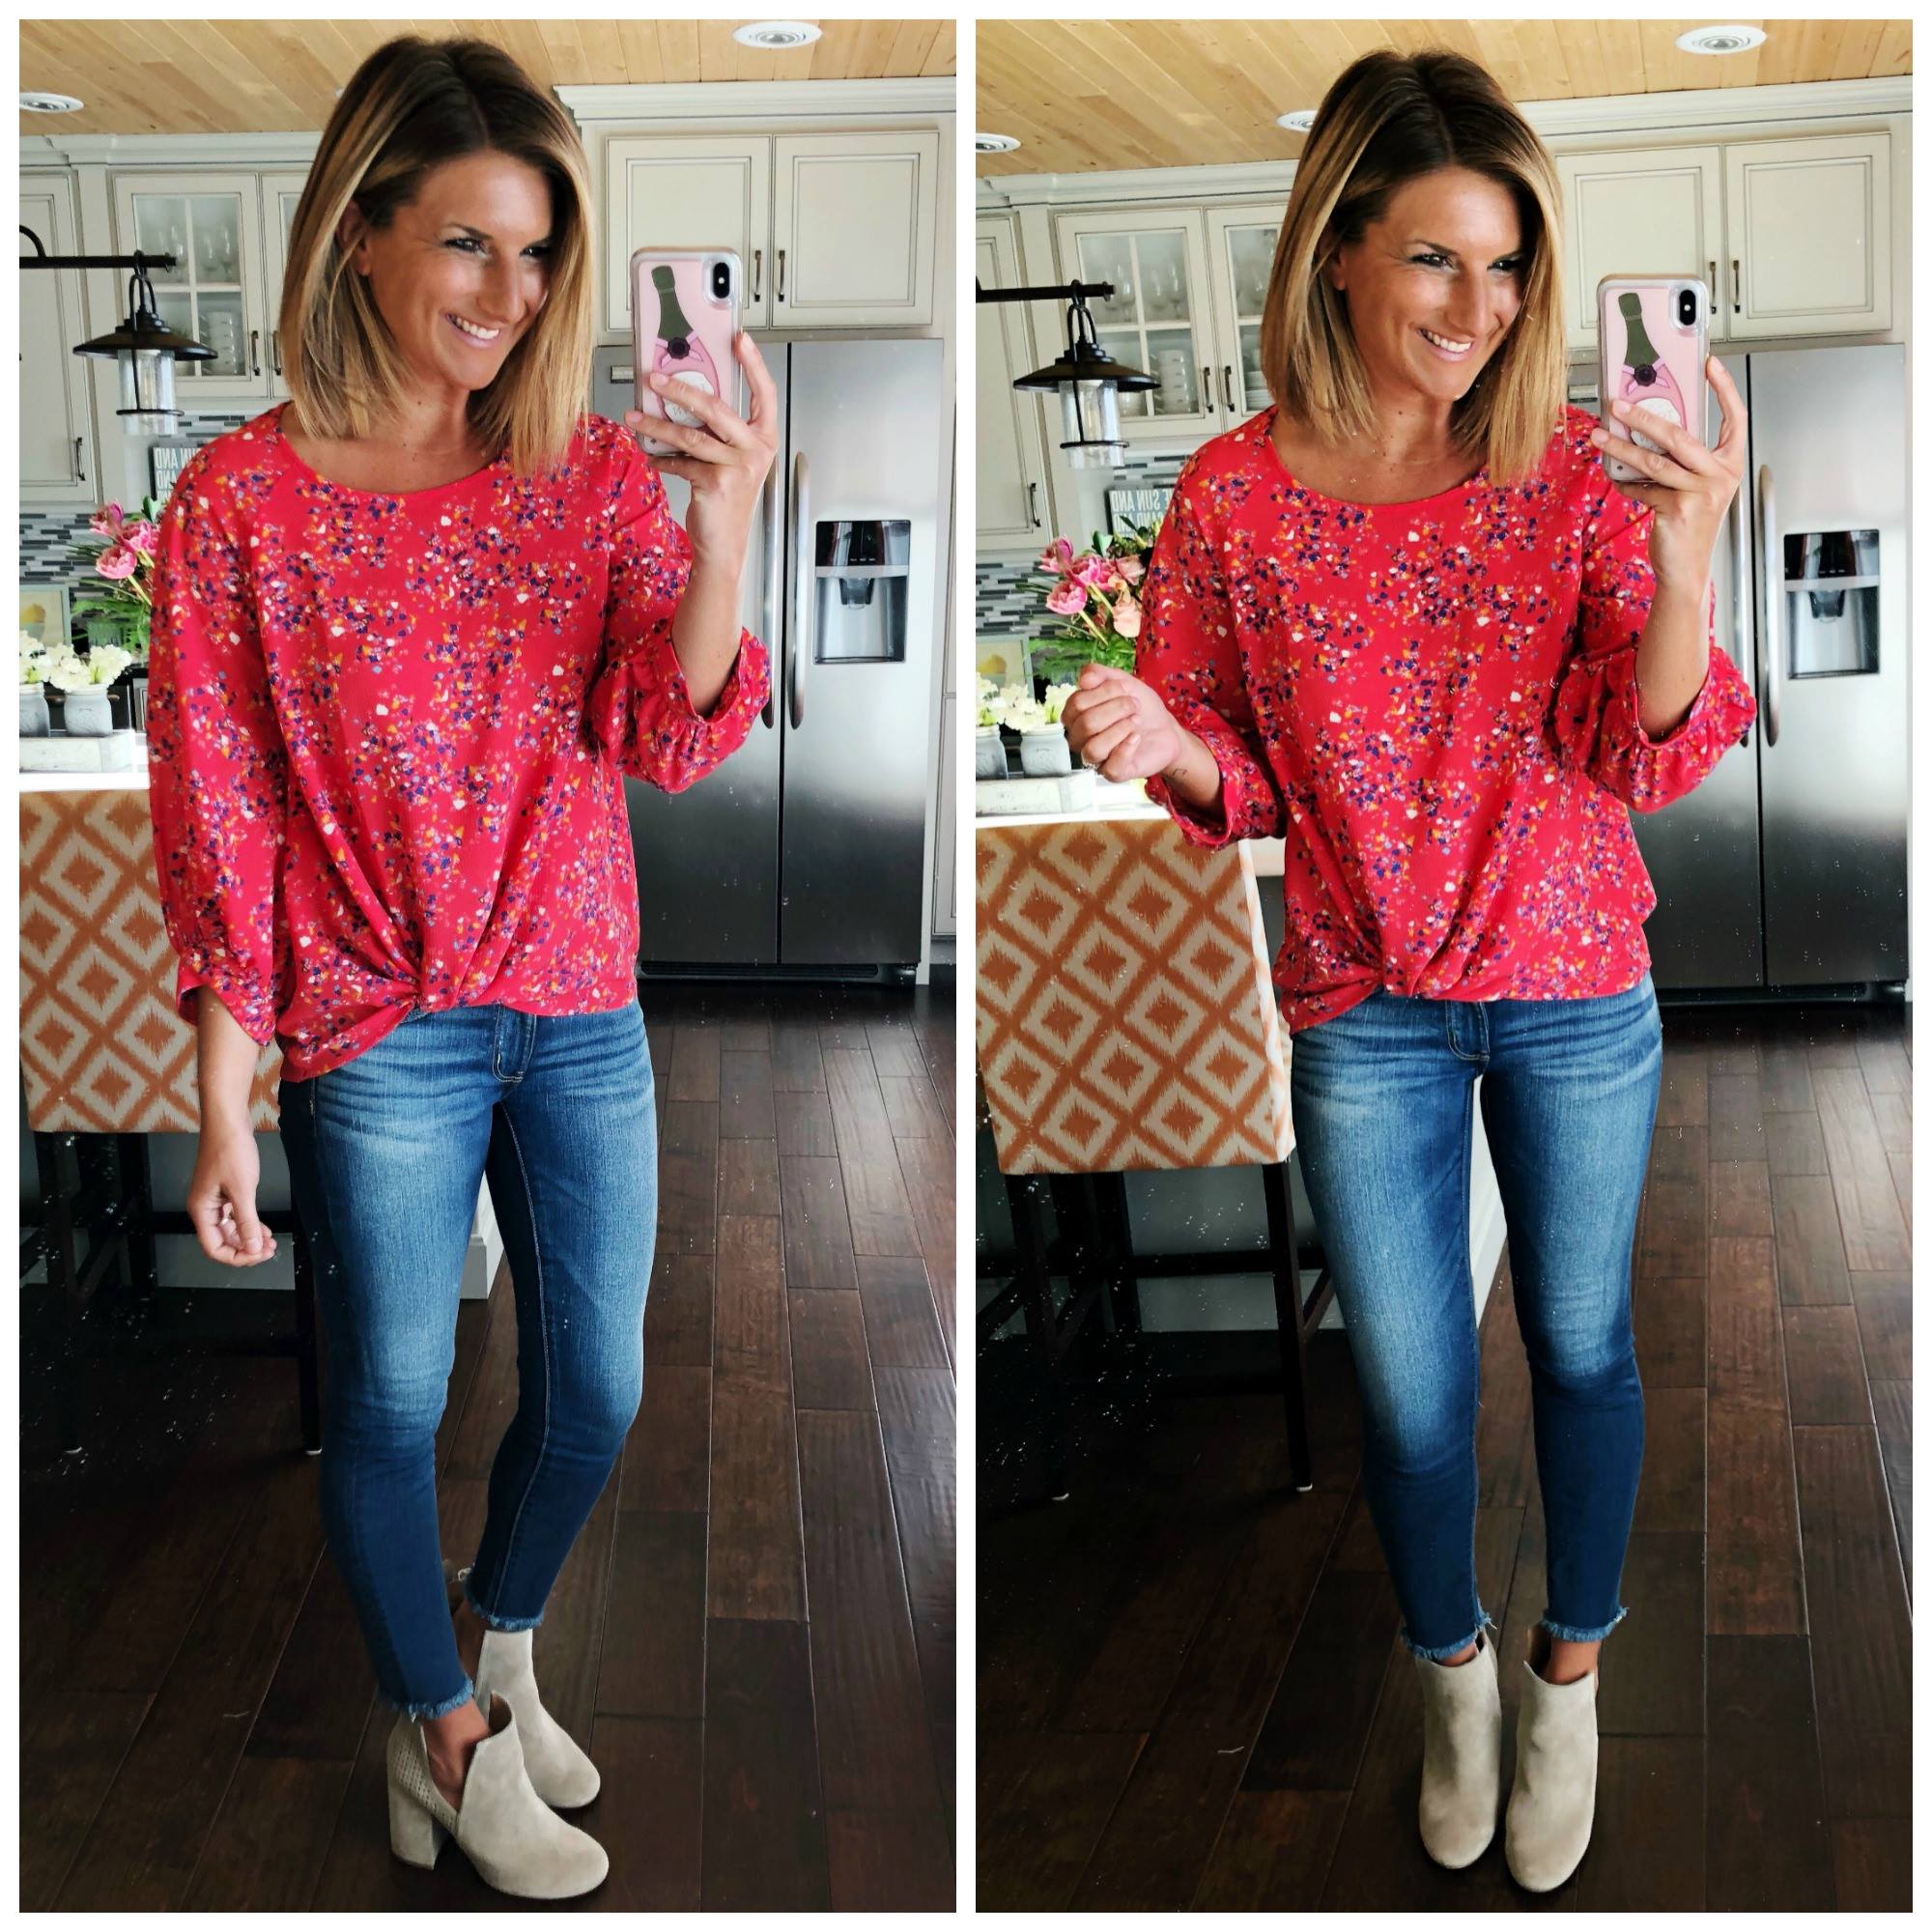 How to Style a Twist Hem Top // Floral Spring Top // Twist Hem Top + Cropped Jeggings + Cutout Booties